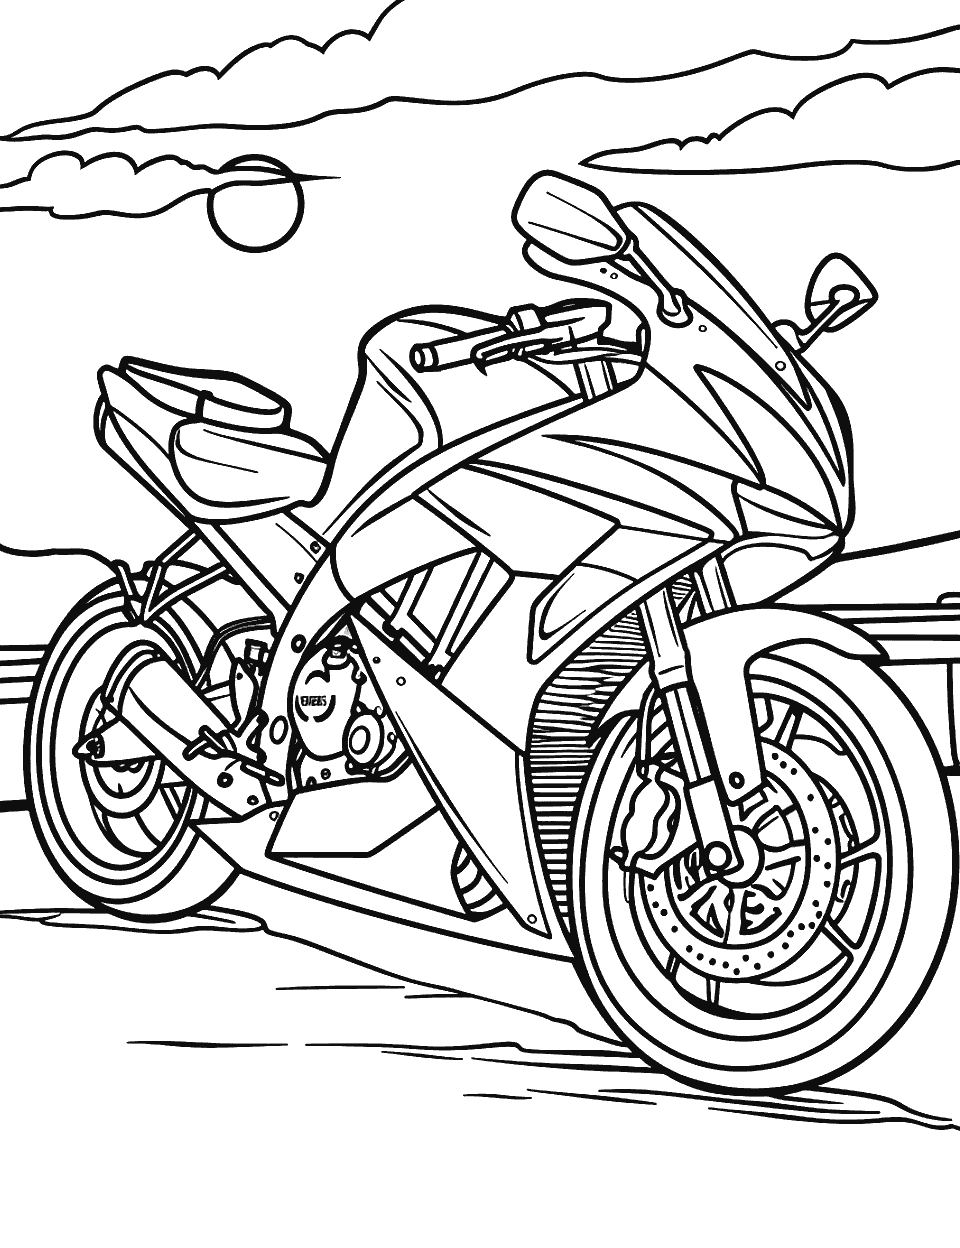 Sport Bike at Rest Motorcycle Coloring Page - A sleek sport bike parked with the sun in the background.